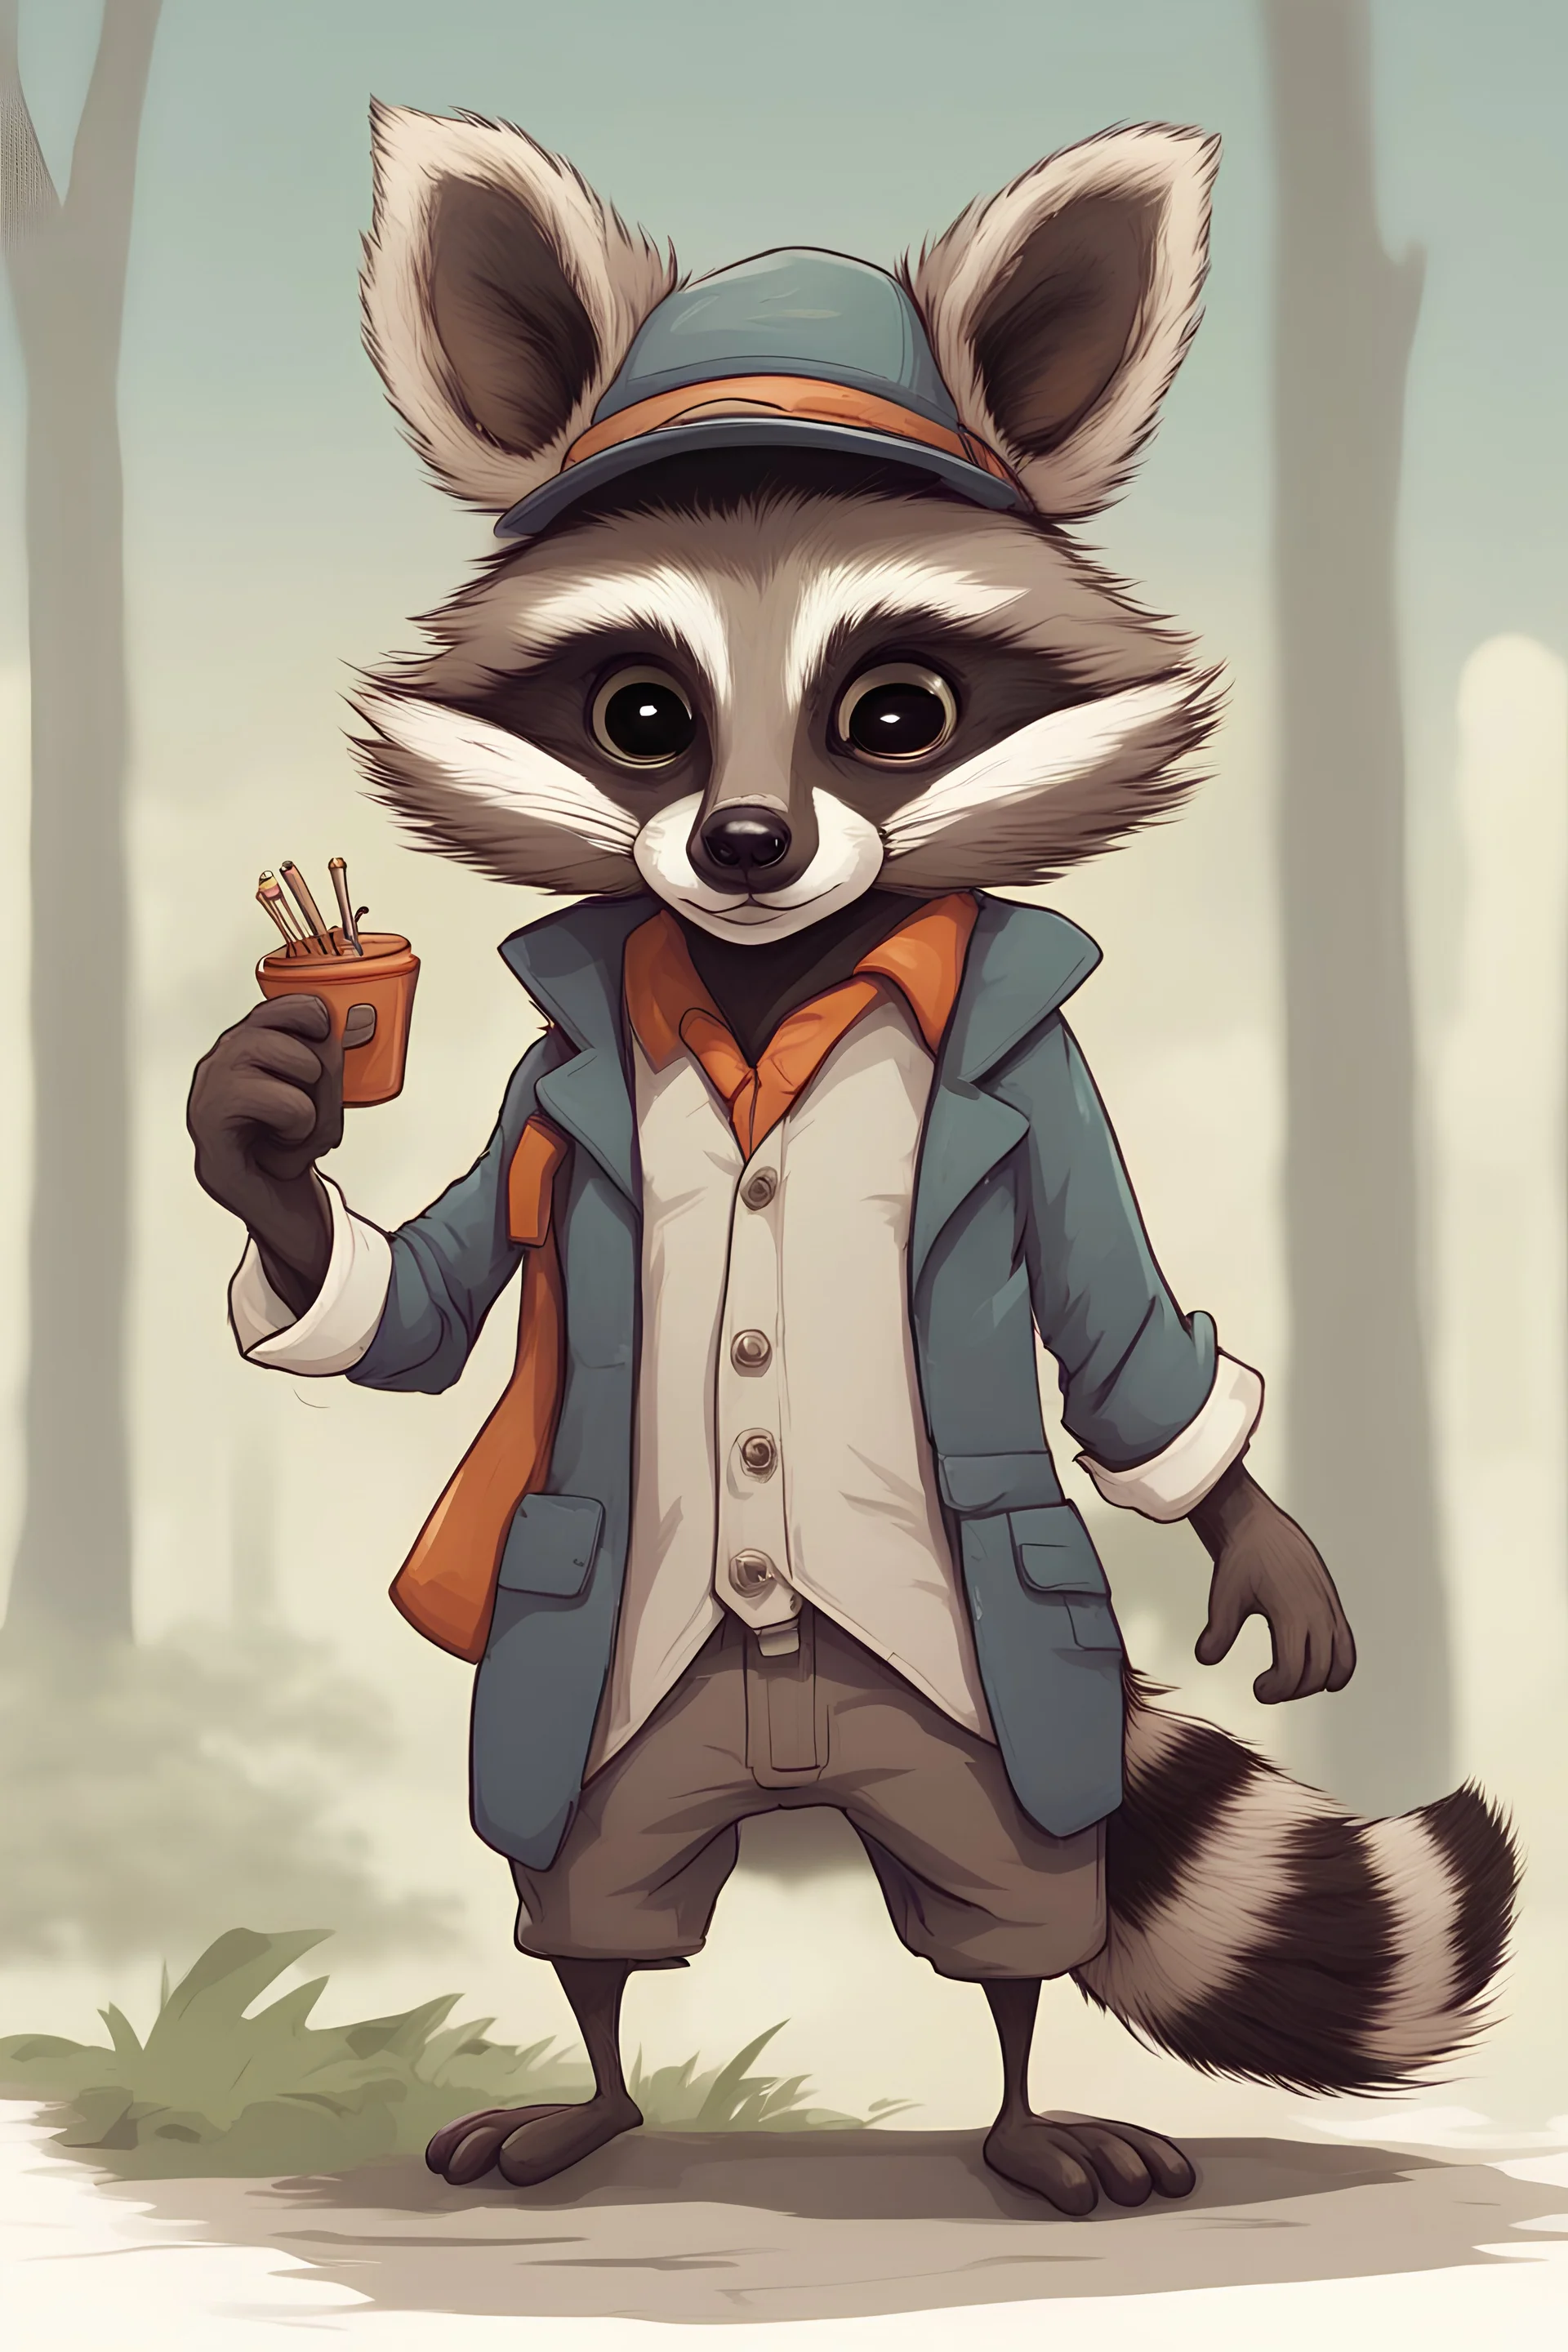 a really long-nosed raccoon from the future, with educated and skillful hands, long nose, that wears clothes and standing on two legs